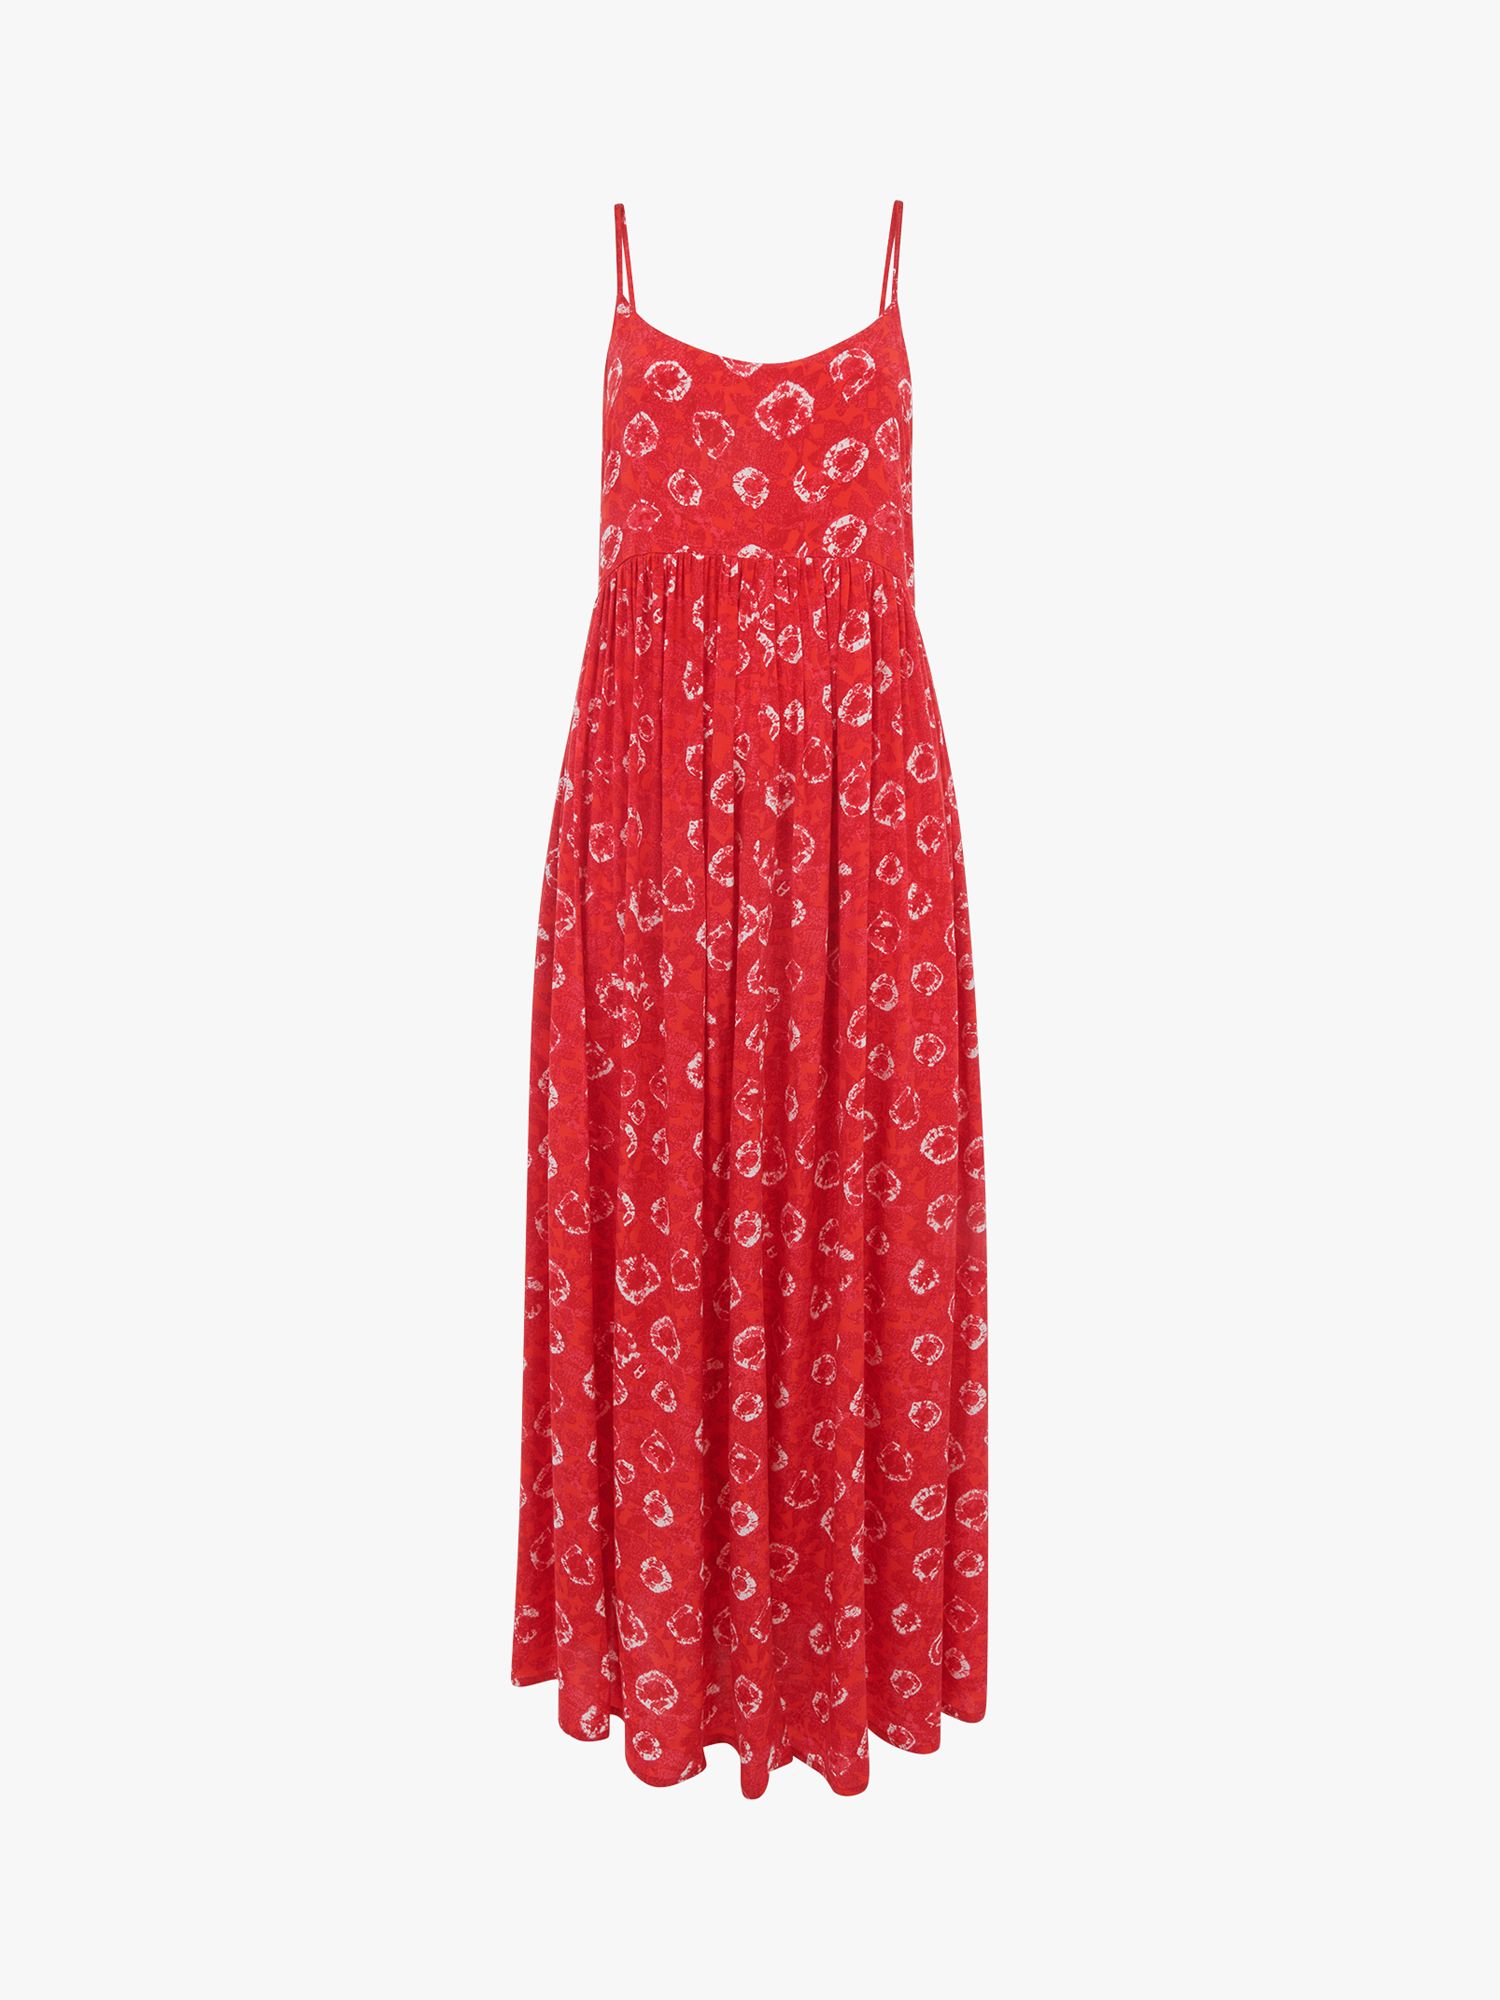 Whistles Tie Dye Floral Print Maxi Dress, Red at John Lewis & Partners